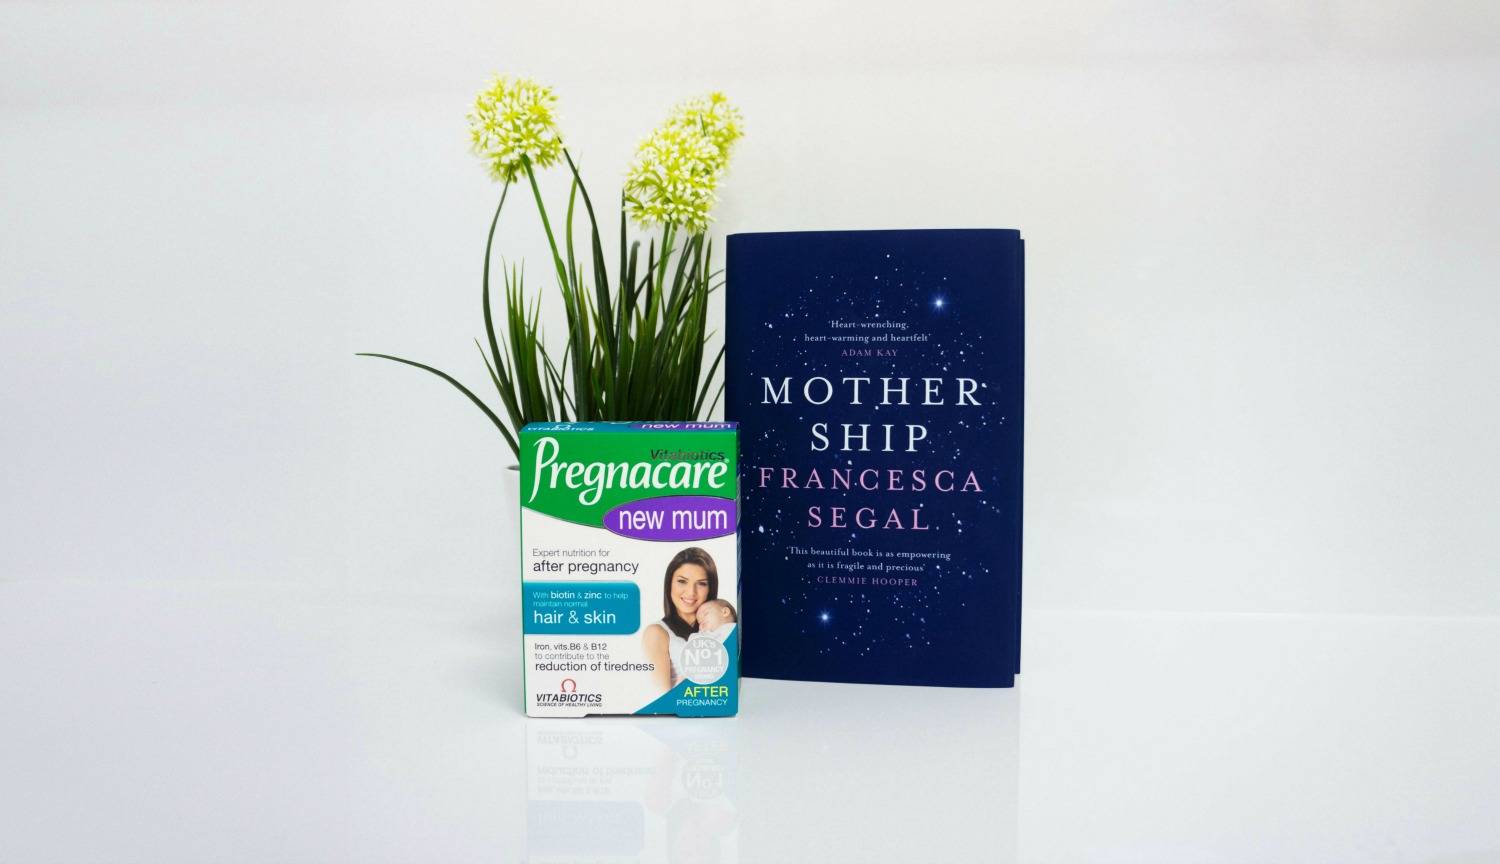 Pregnacare New Mum Product With Mother Ship Book